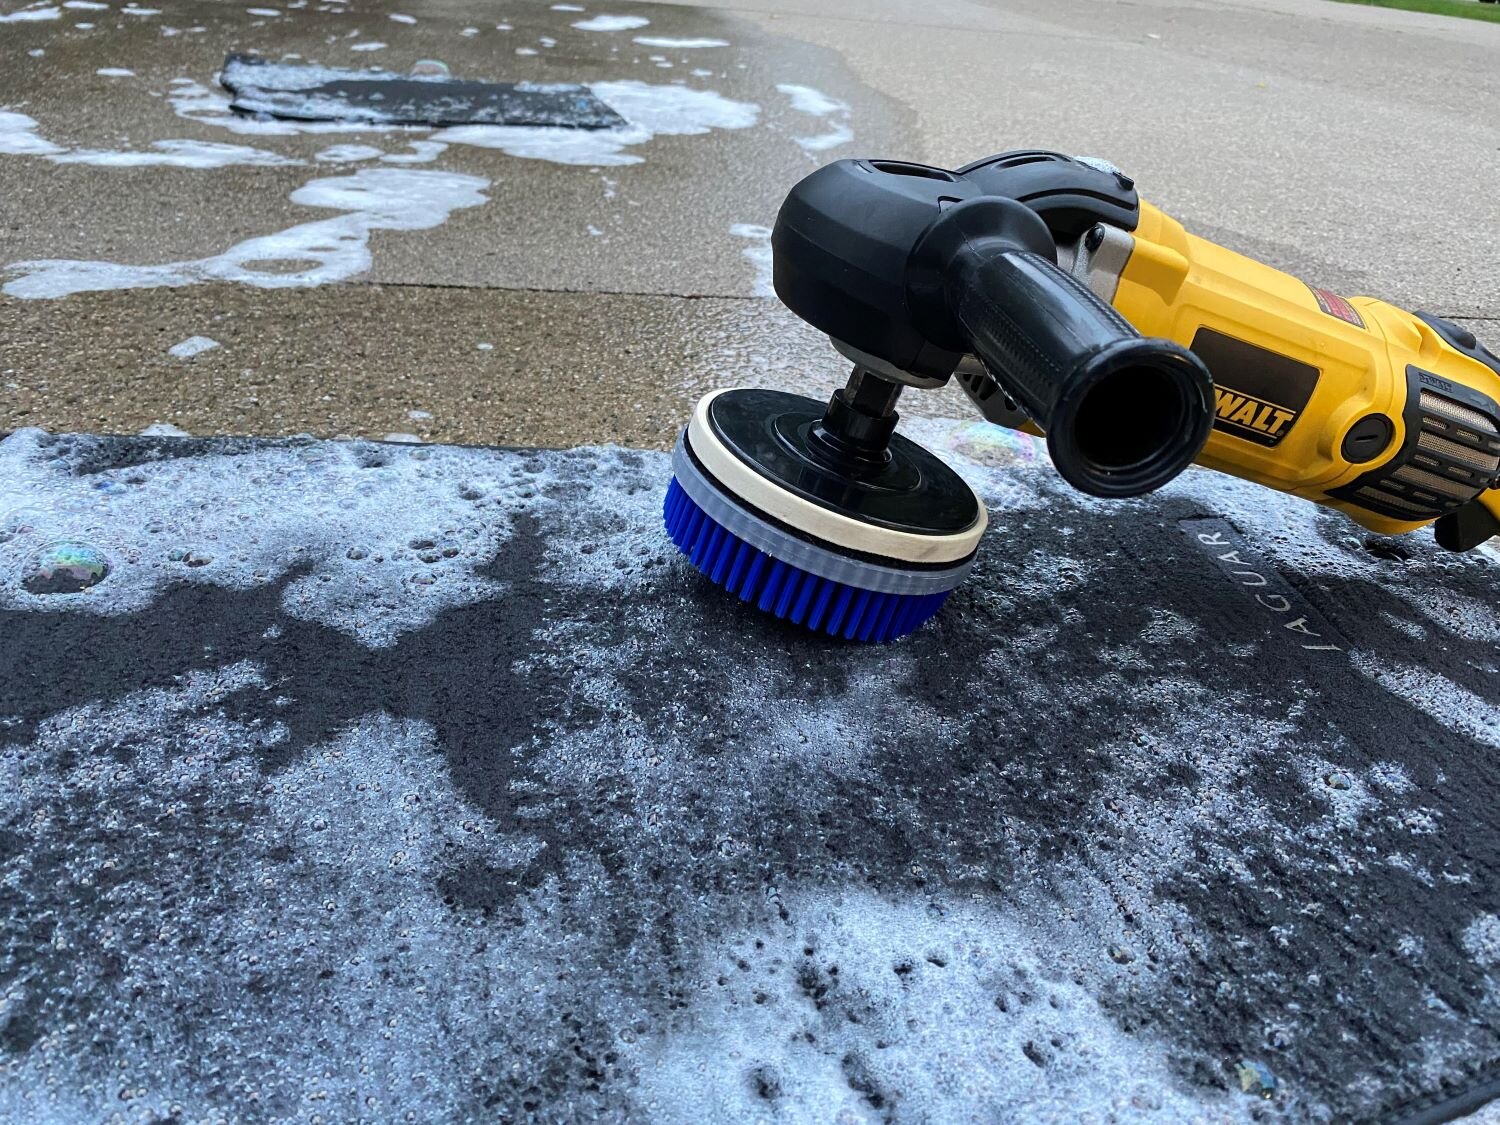 Agitation is being performed to loosen hard and embedded dirt before pressure washing of floor mats.